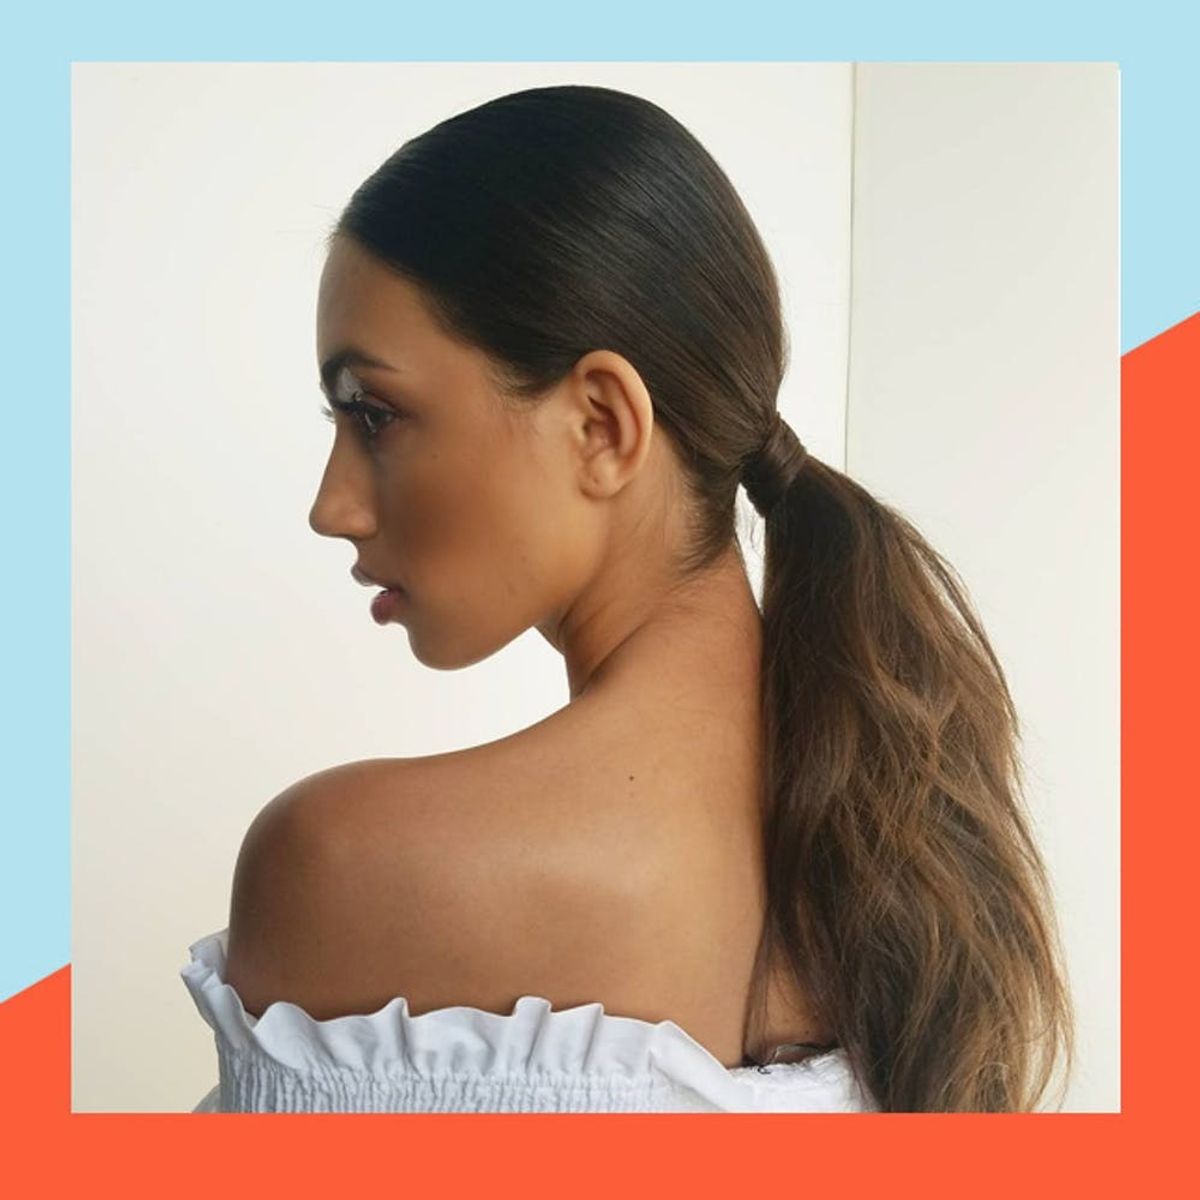 6 Hottest Hairstyles to Try This Spring, According to Your Length